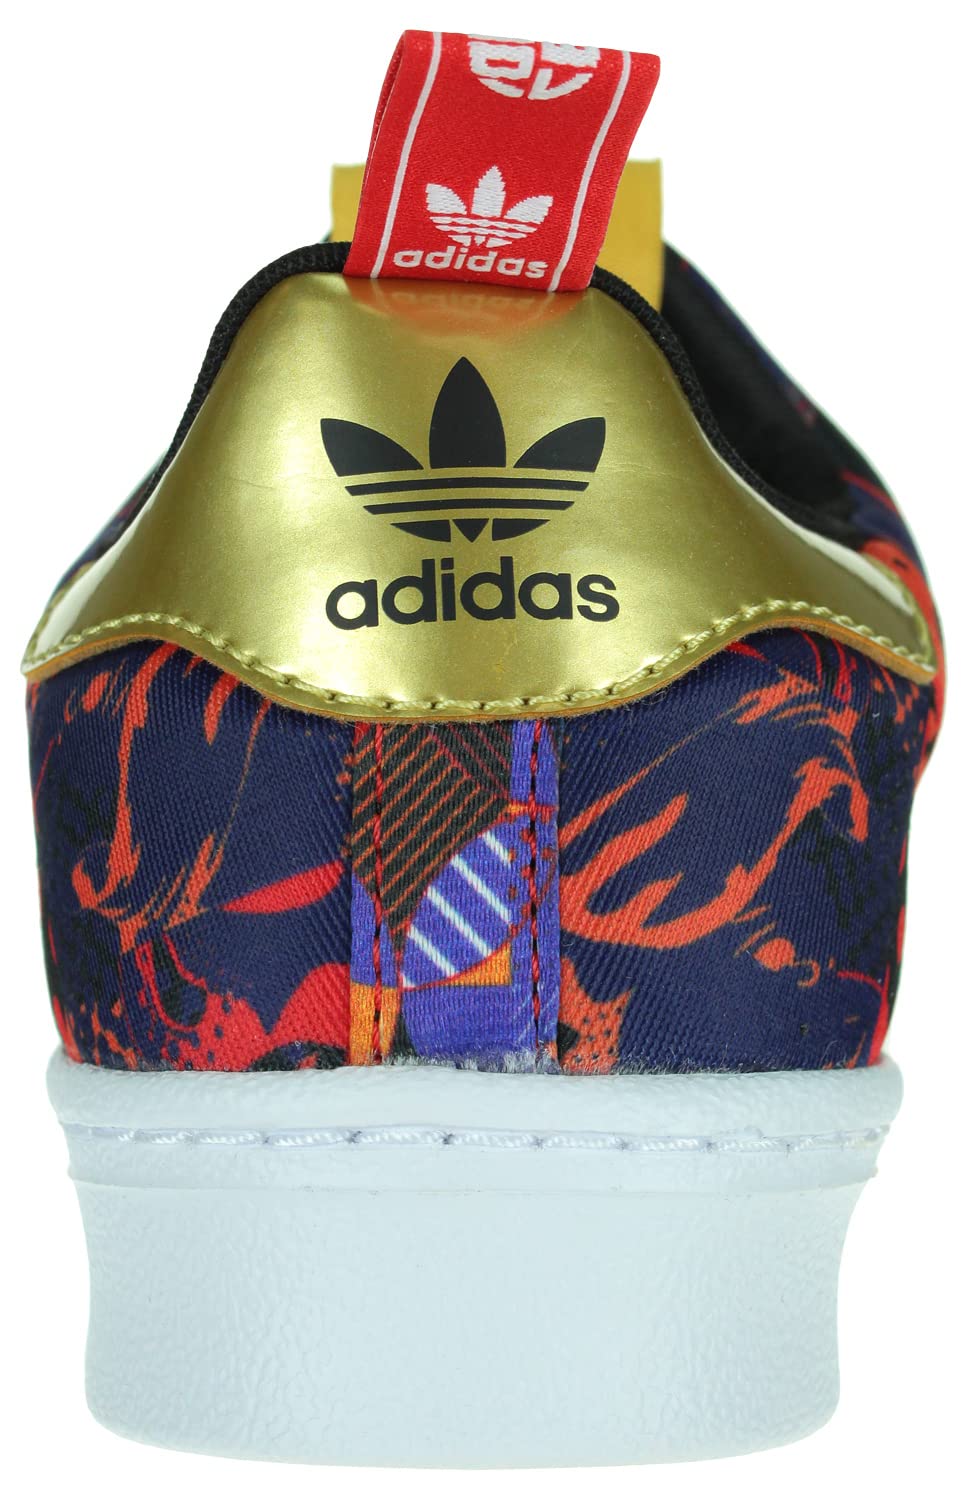 adidas Originals Little Kids/Infant Superstar 360 New Year Sneakers, Color Options